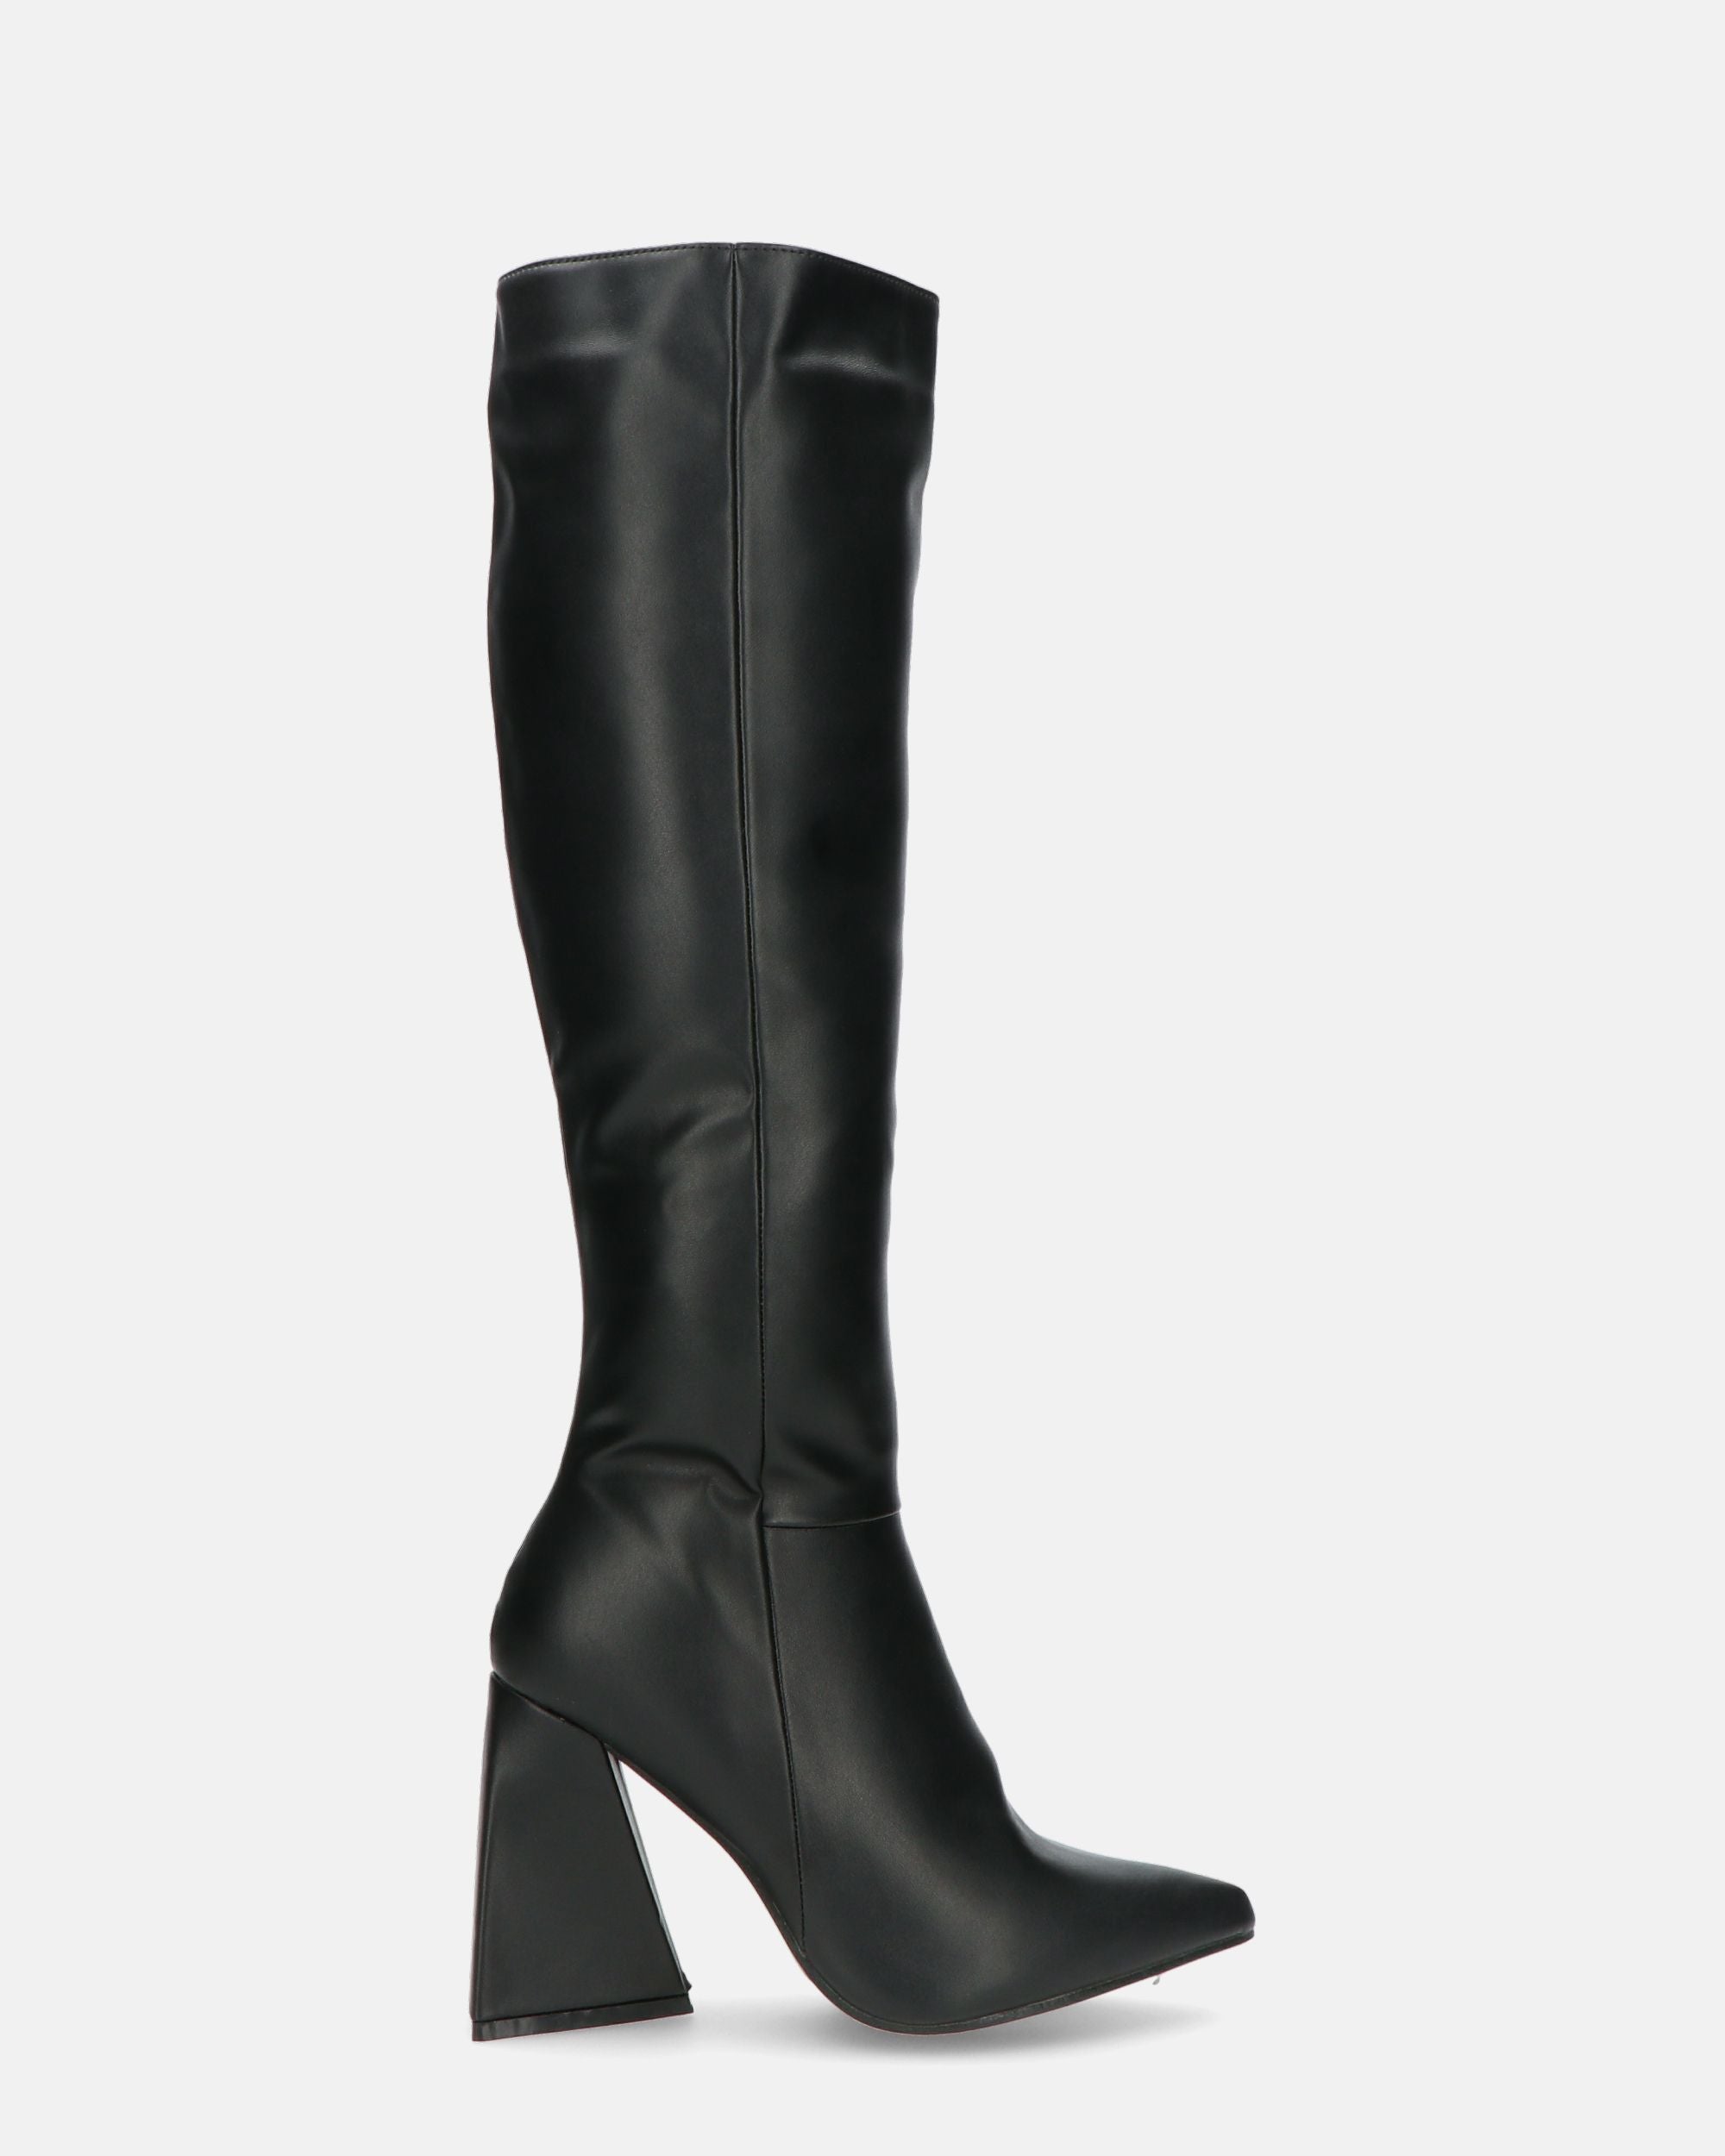 TRUDY - high-heeled boots in black PU